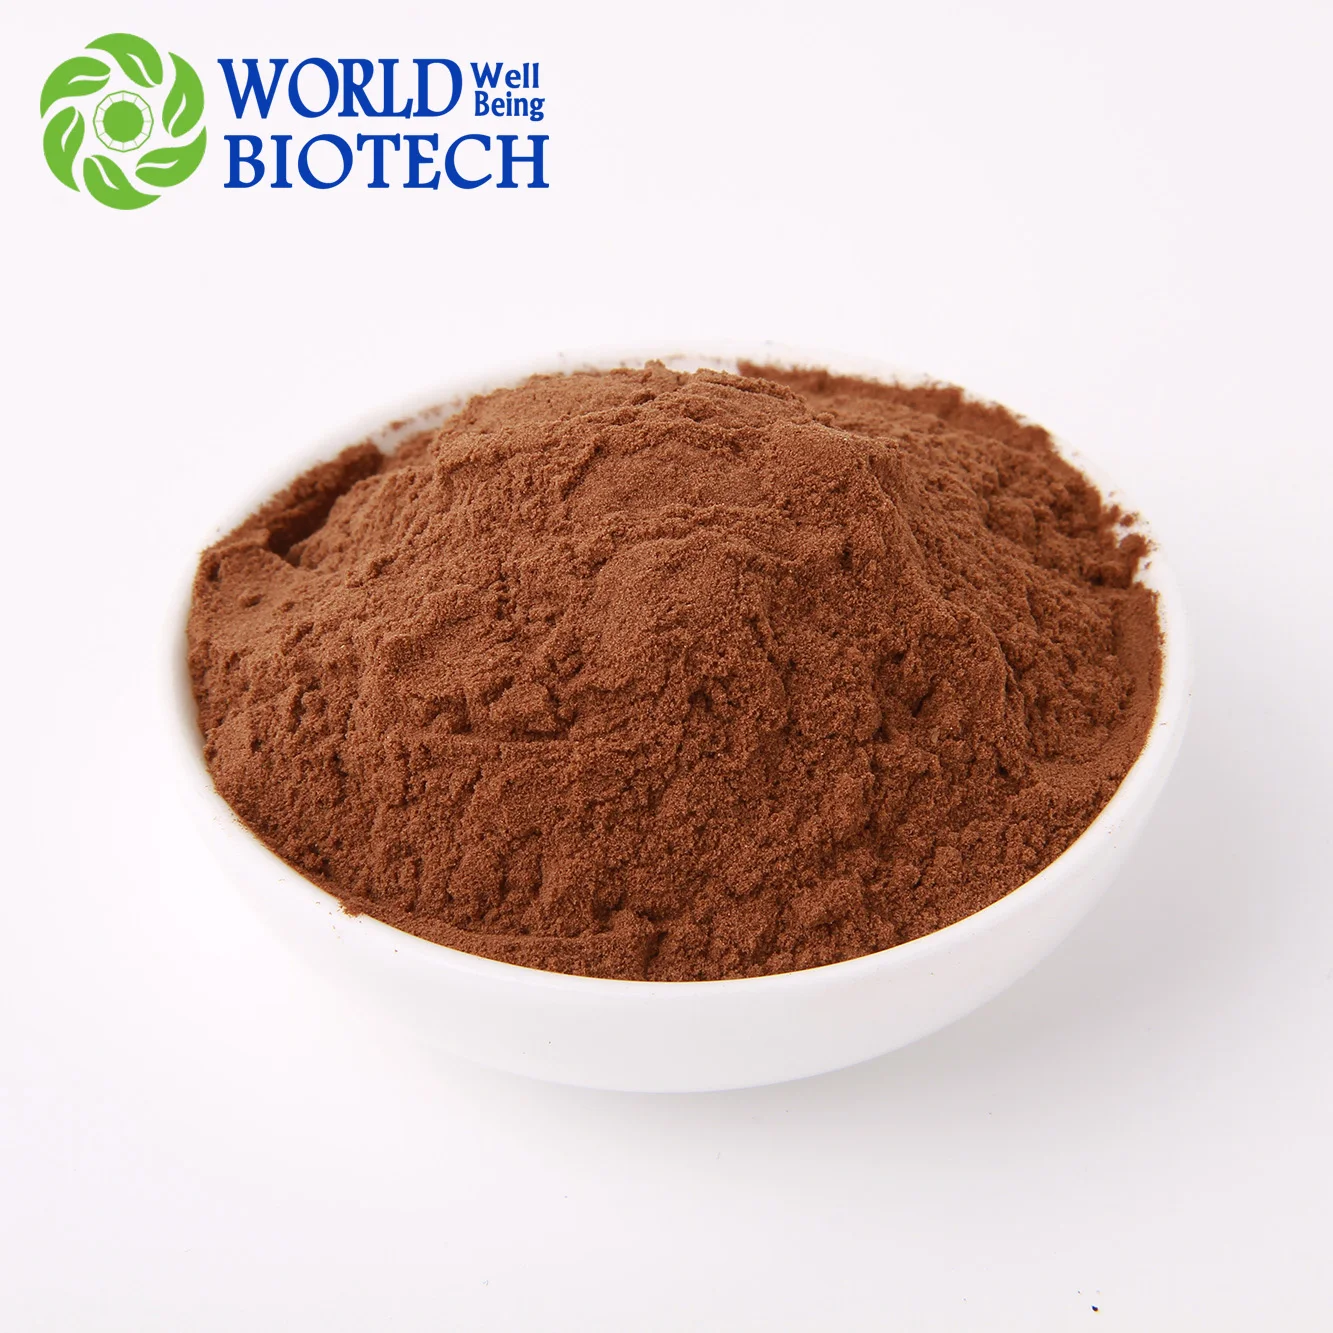 high quality burdock root extract /great burdock achene extract / burdock seed extract powder